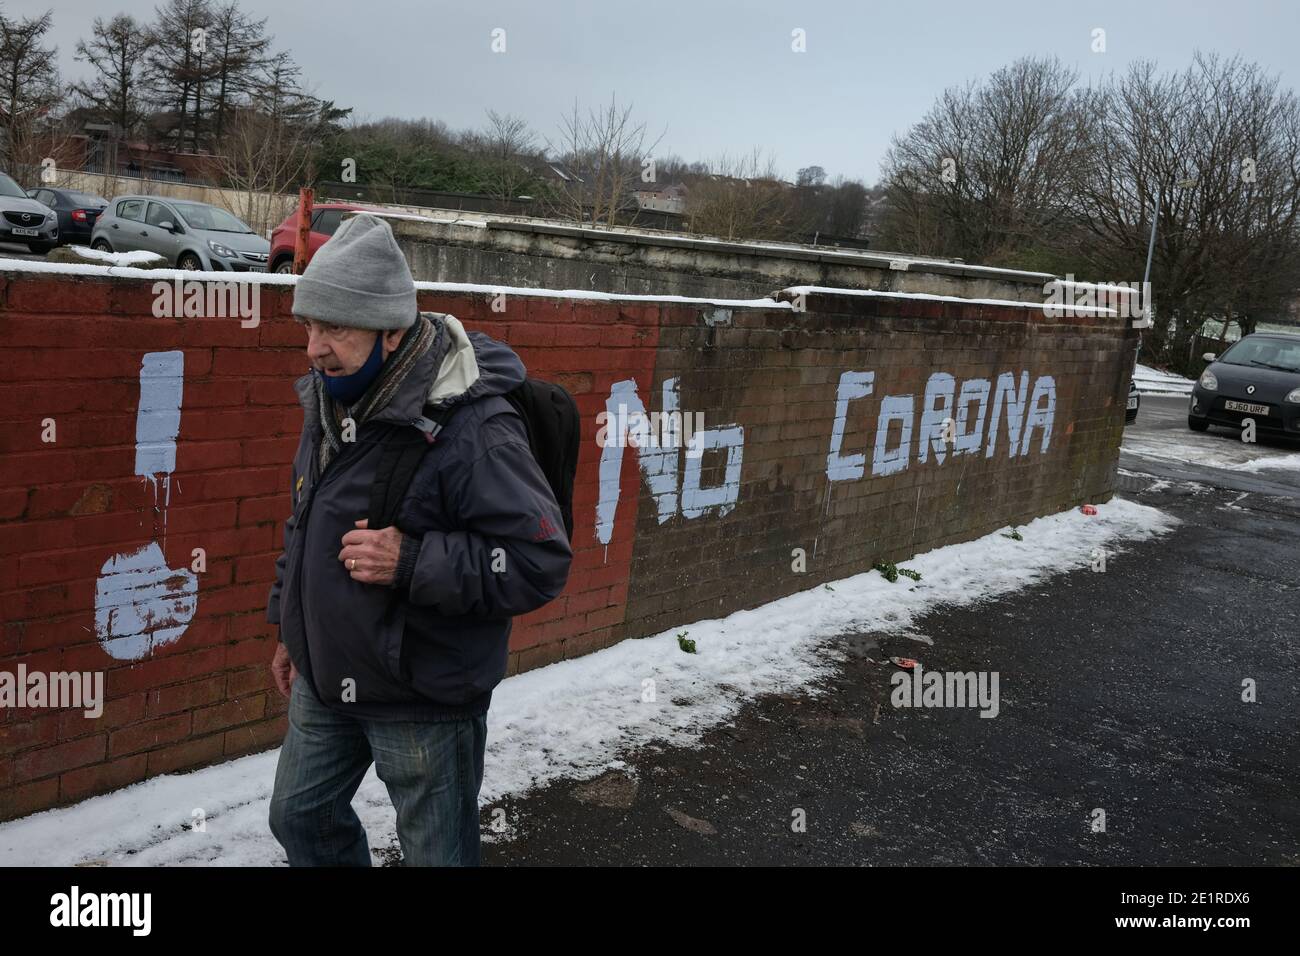 Glasgow, UK, 9 January 2021. In the week when the UK saw record numbers of cases of Covid-19 being recorded, and daily record numbers of deaths, conspiracy theory graffiti declaring Corona Virus a hoax has appeared on the walls of Drumchapel in the north of the city. Photo credit: Jeremy Sutton-Hibbert/Alamy Live News Stock Photo